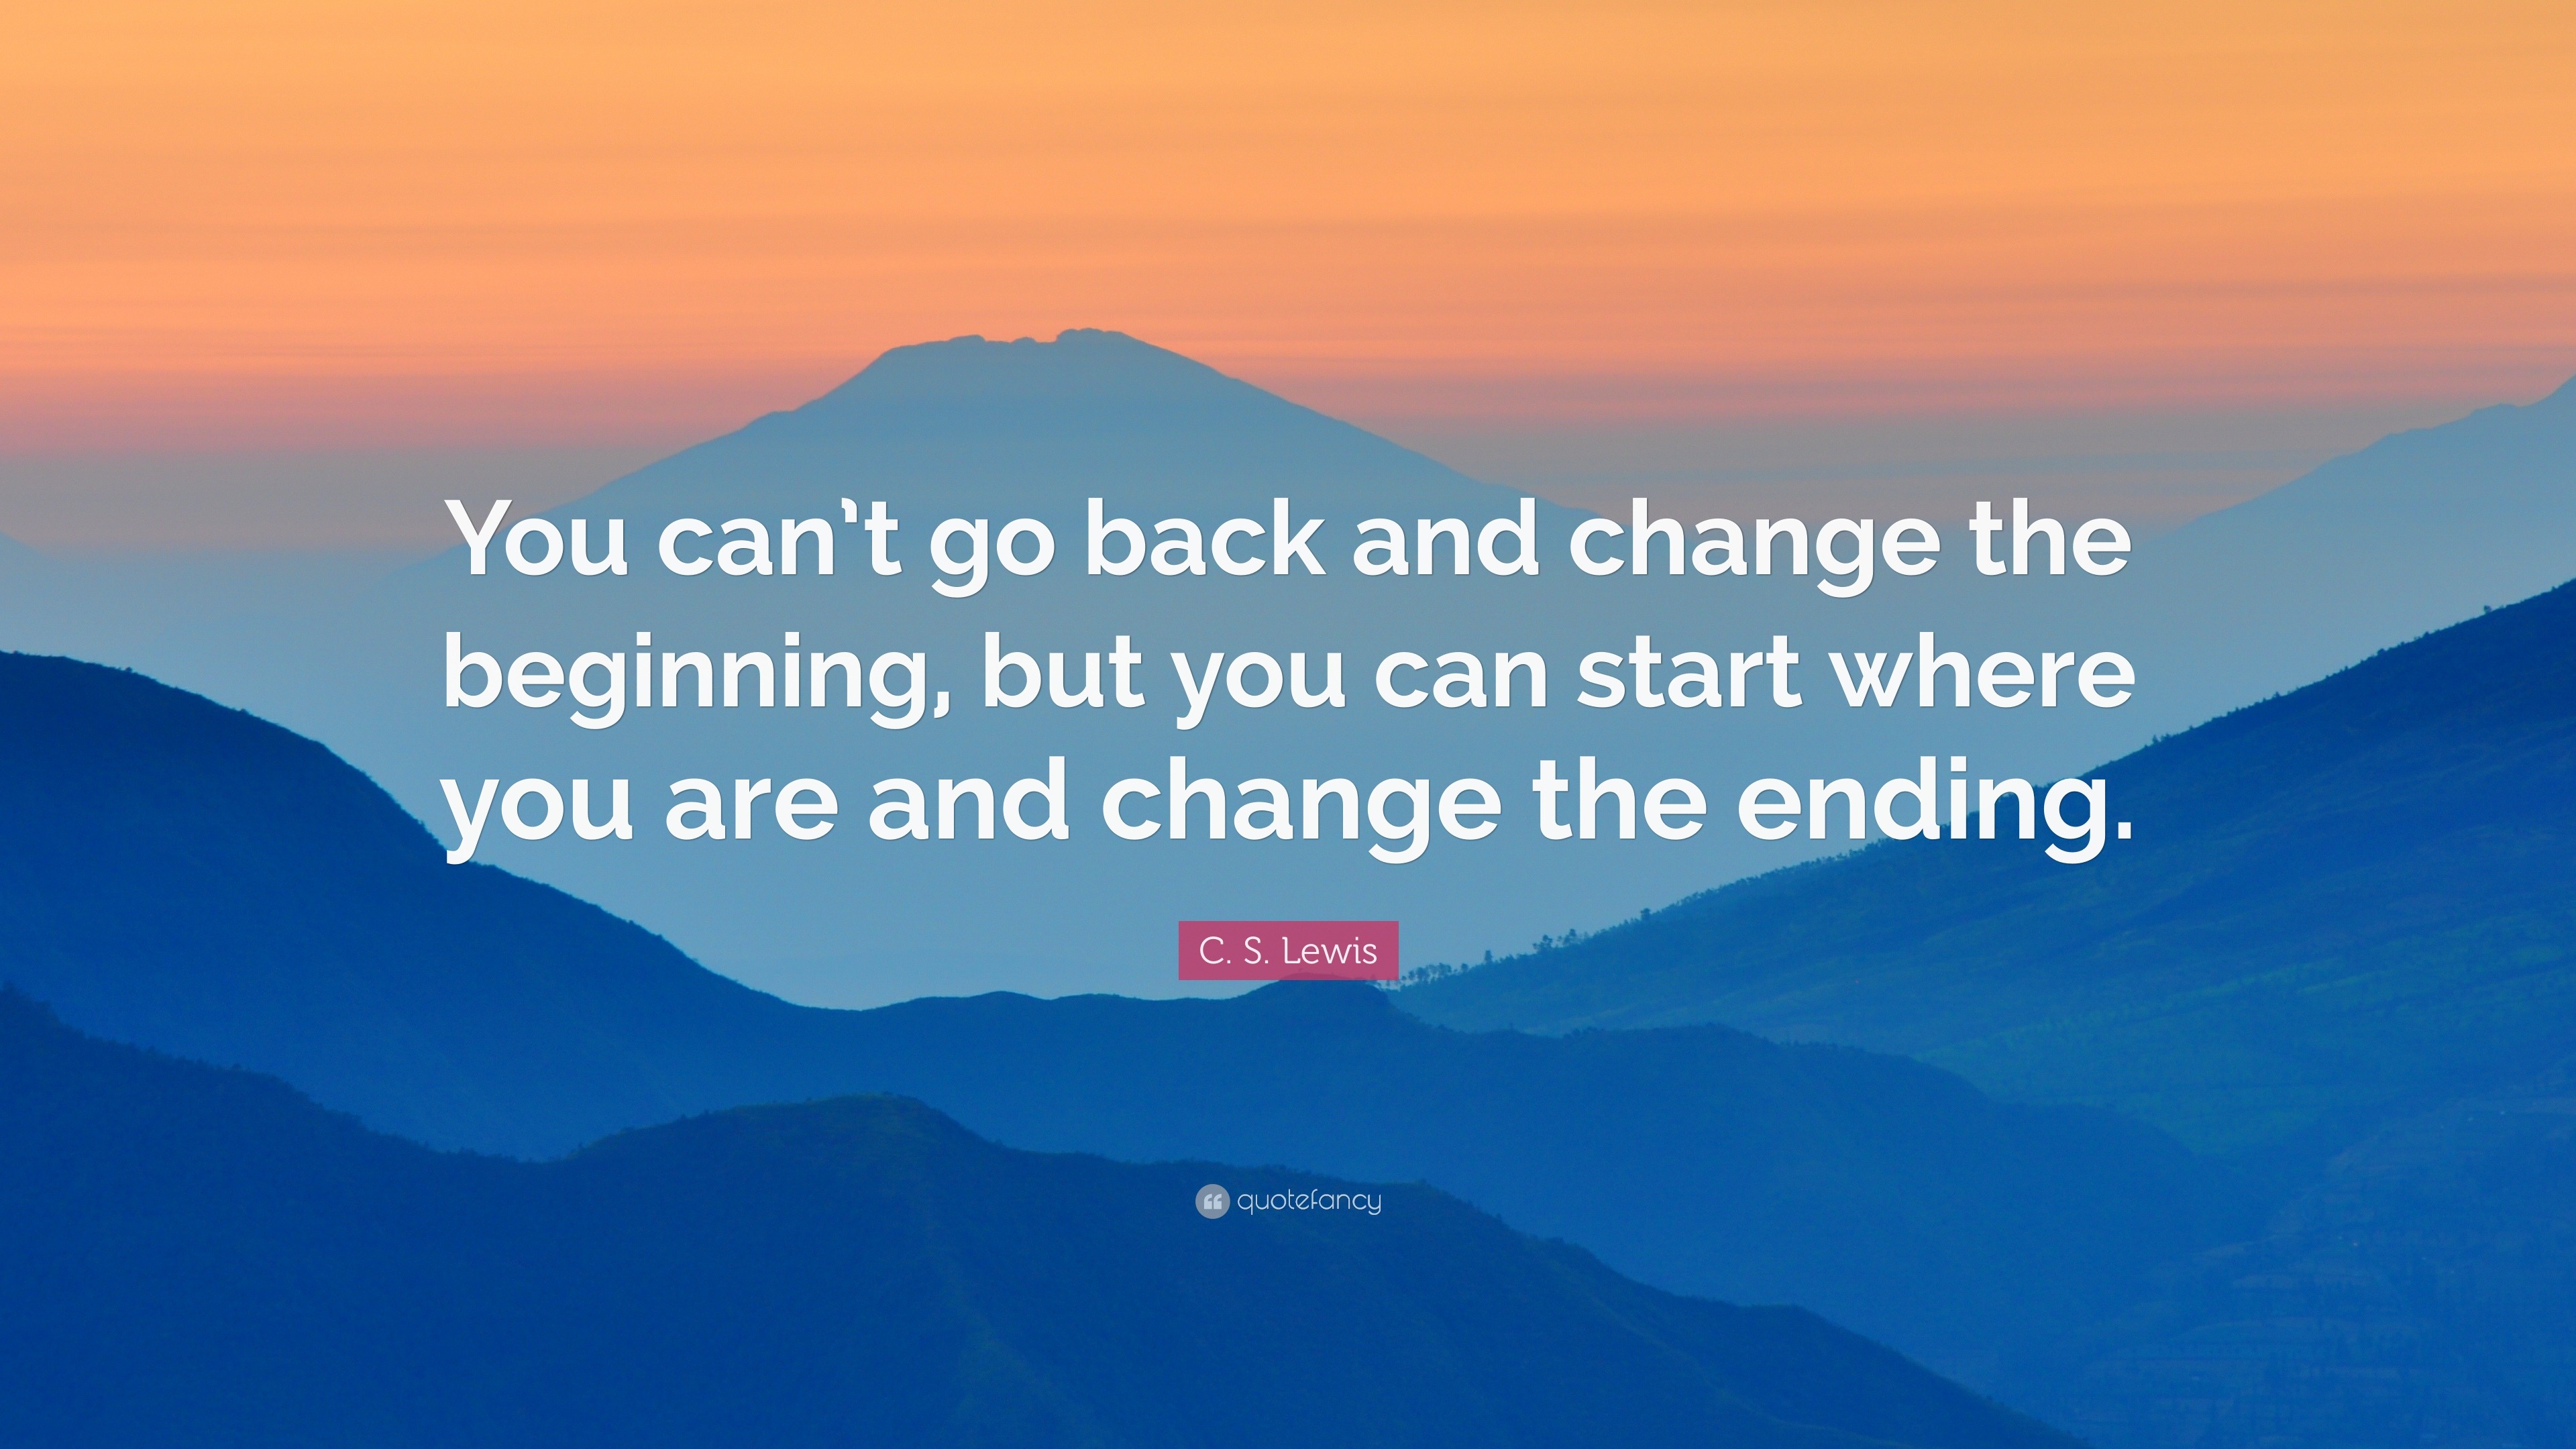 C. S. Lewis Quote: “You can’t go back and change the beginning, but you